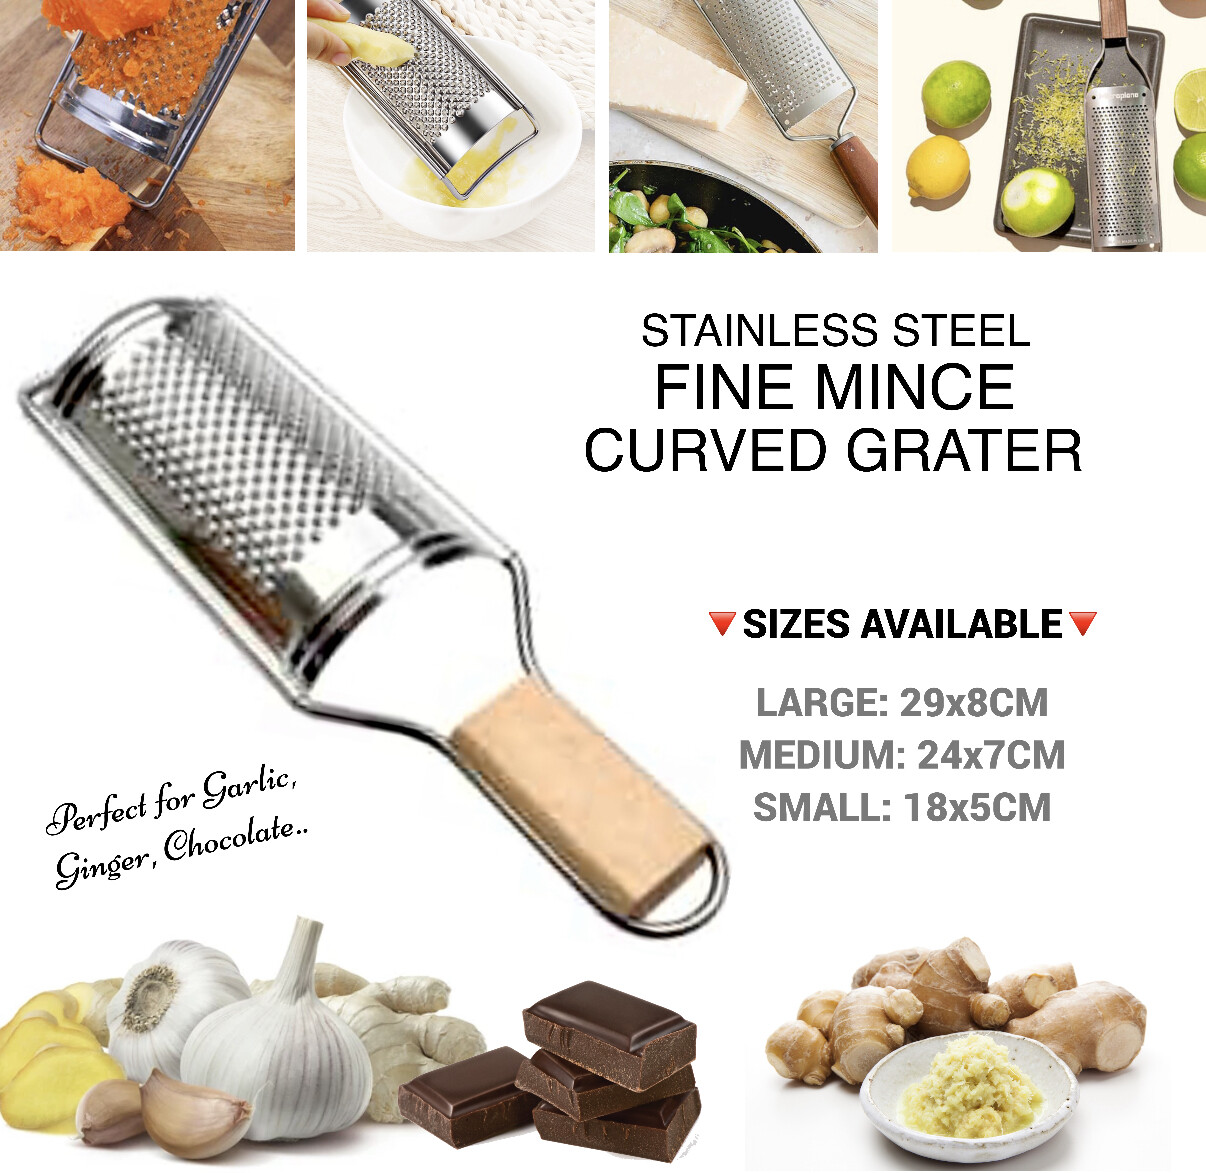 Curved Grater